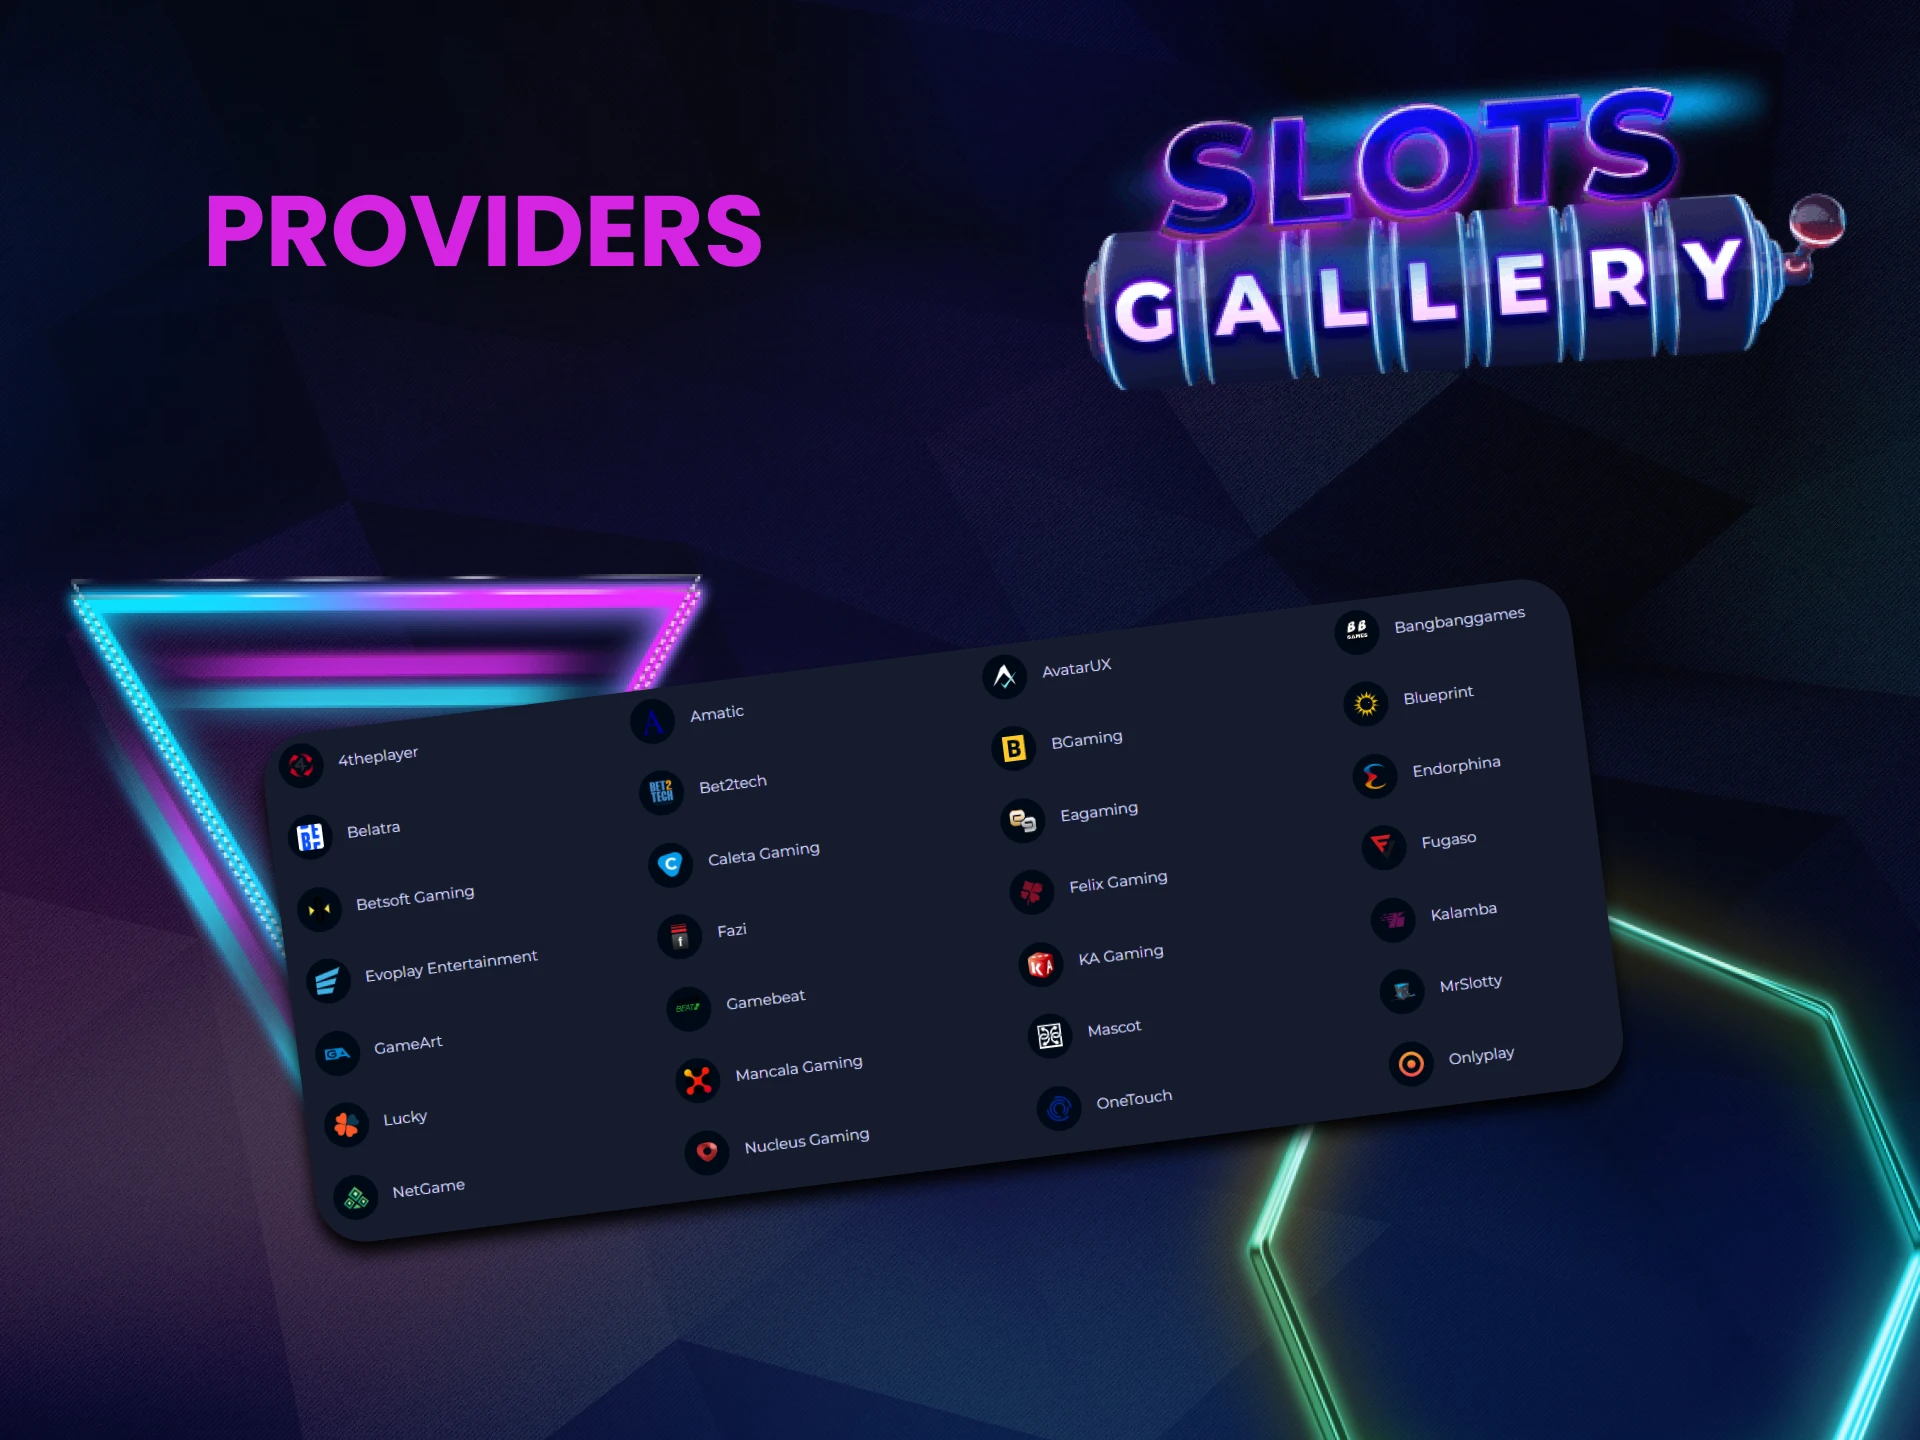 There are many providers of slot games on Slots Gallery.